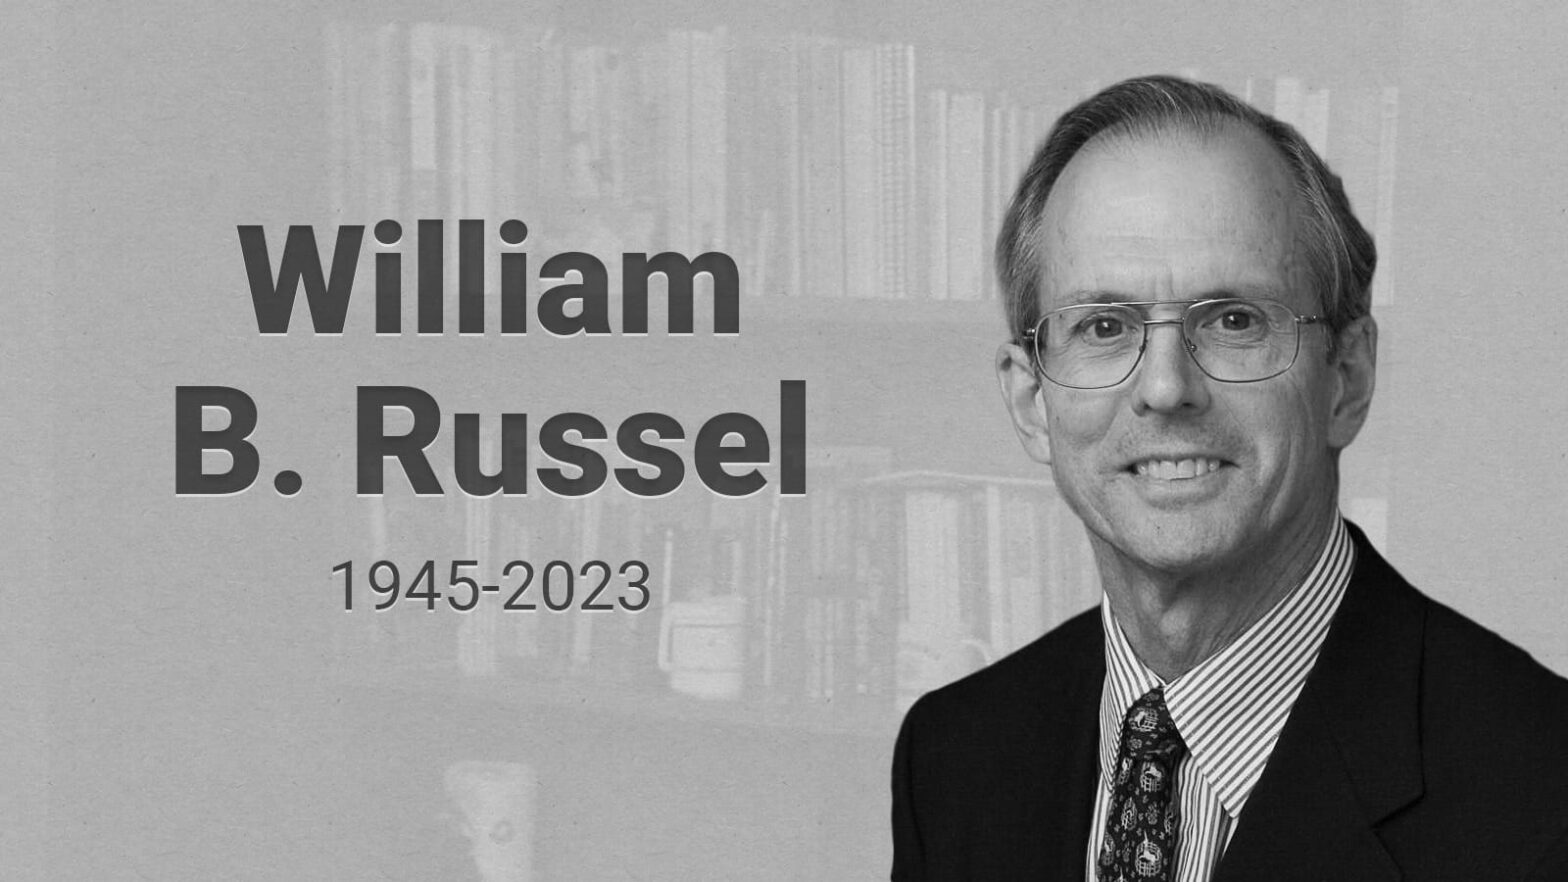 Black-and-white illustration with portrait and the words "William B. Russel 1945-2023"